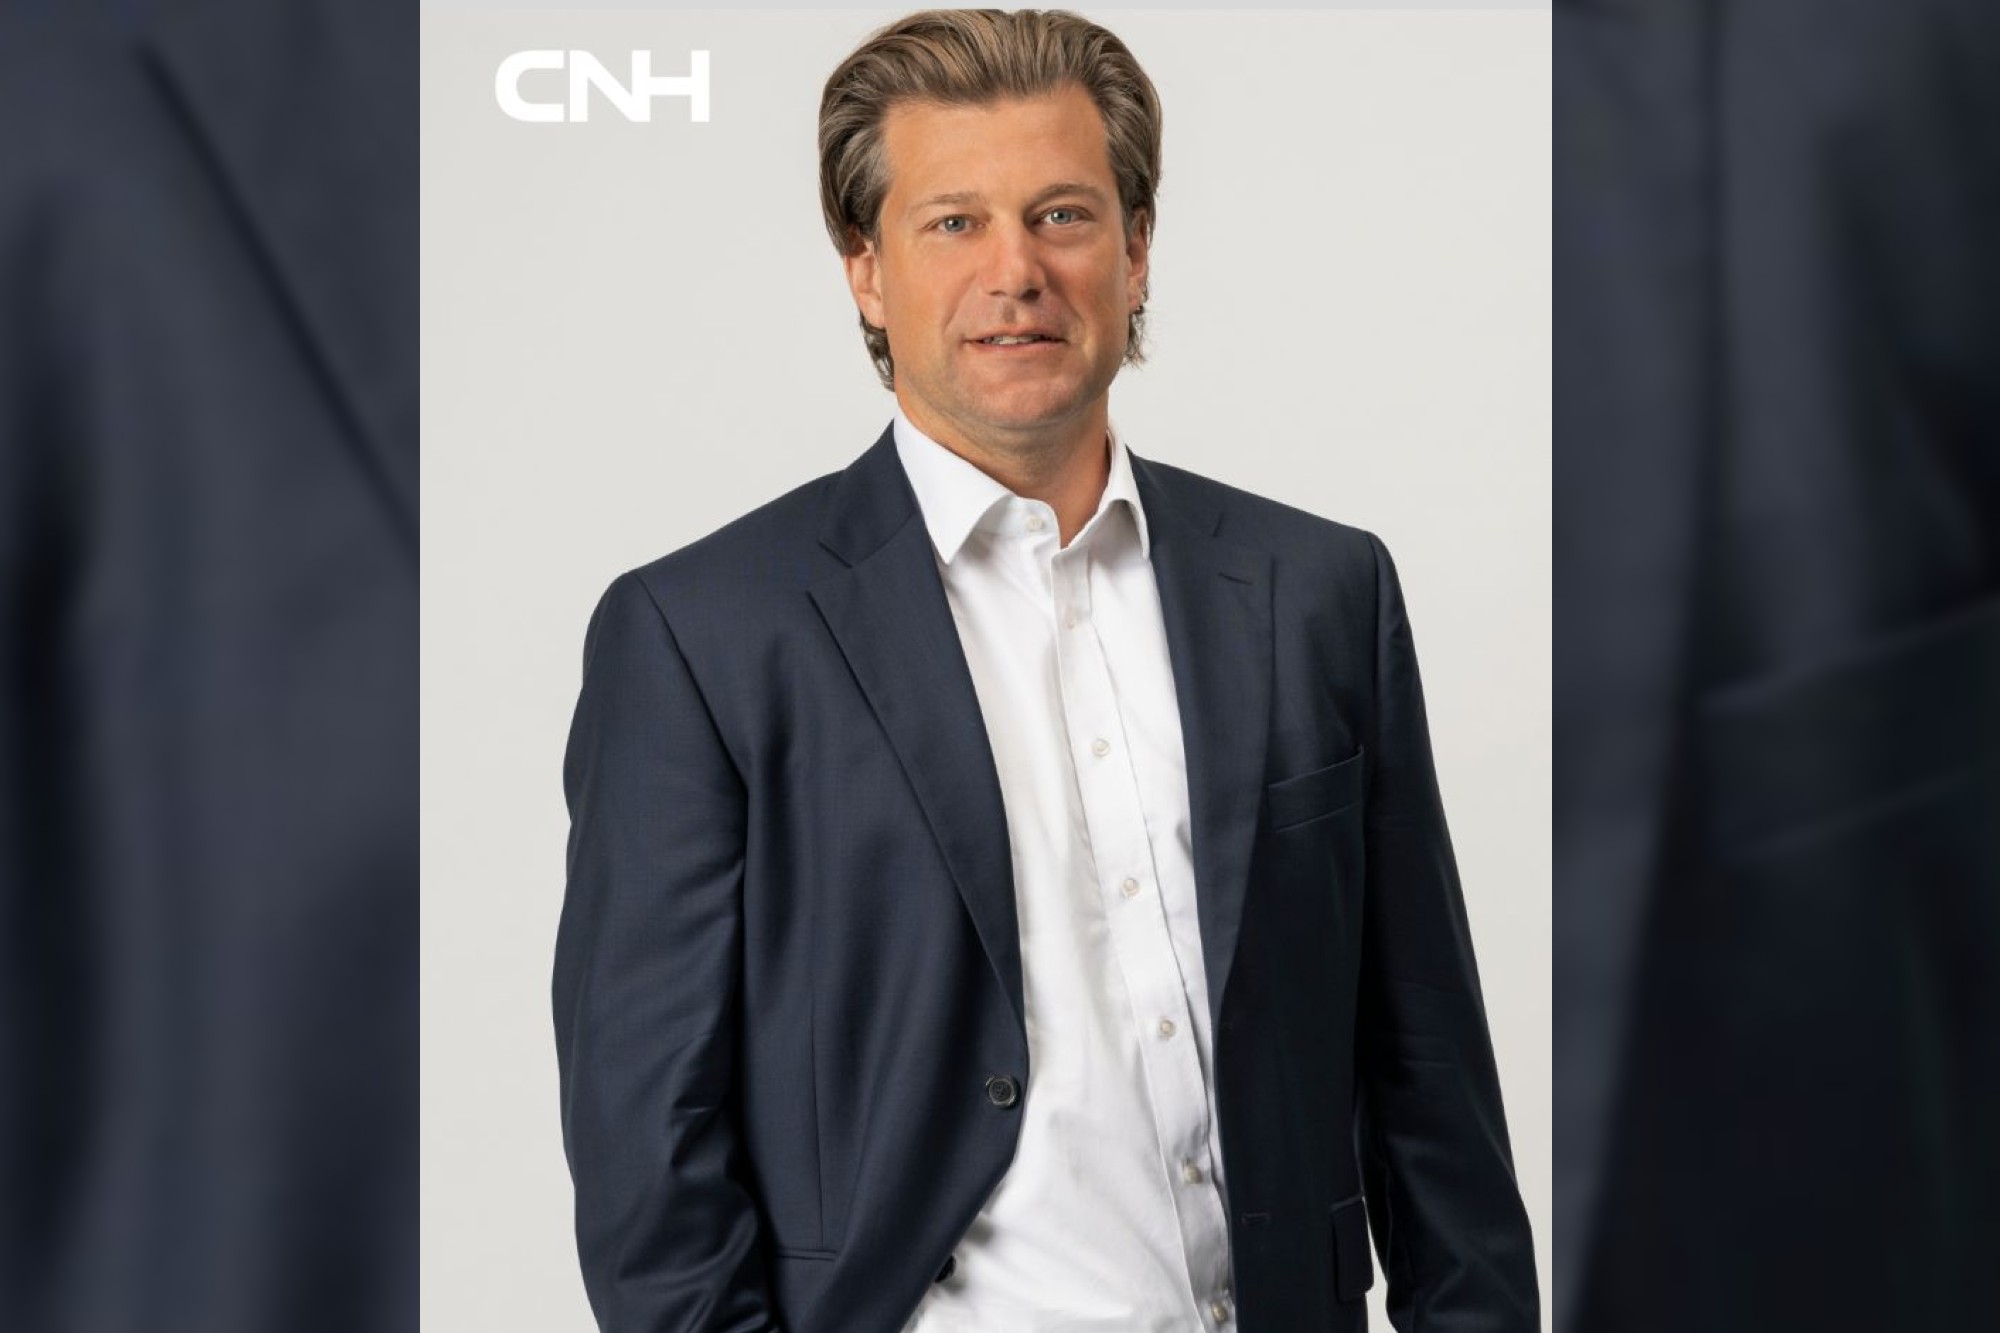 Marx returns to CNH from Iveco Group, succeeding Scott W. Wine who has decided to leave the Company having successfully overseen the delivery of the 2021 Business Plan.